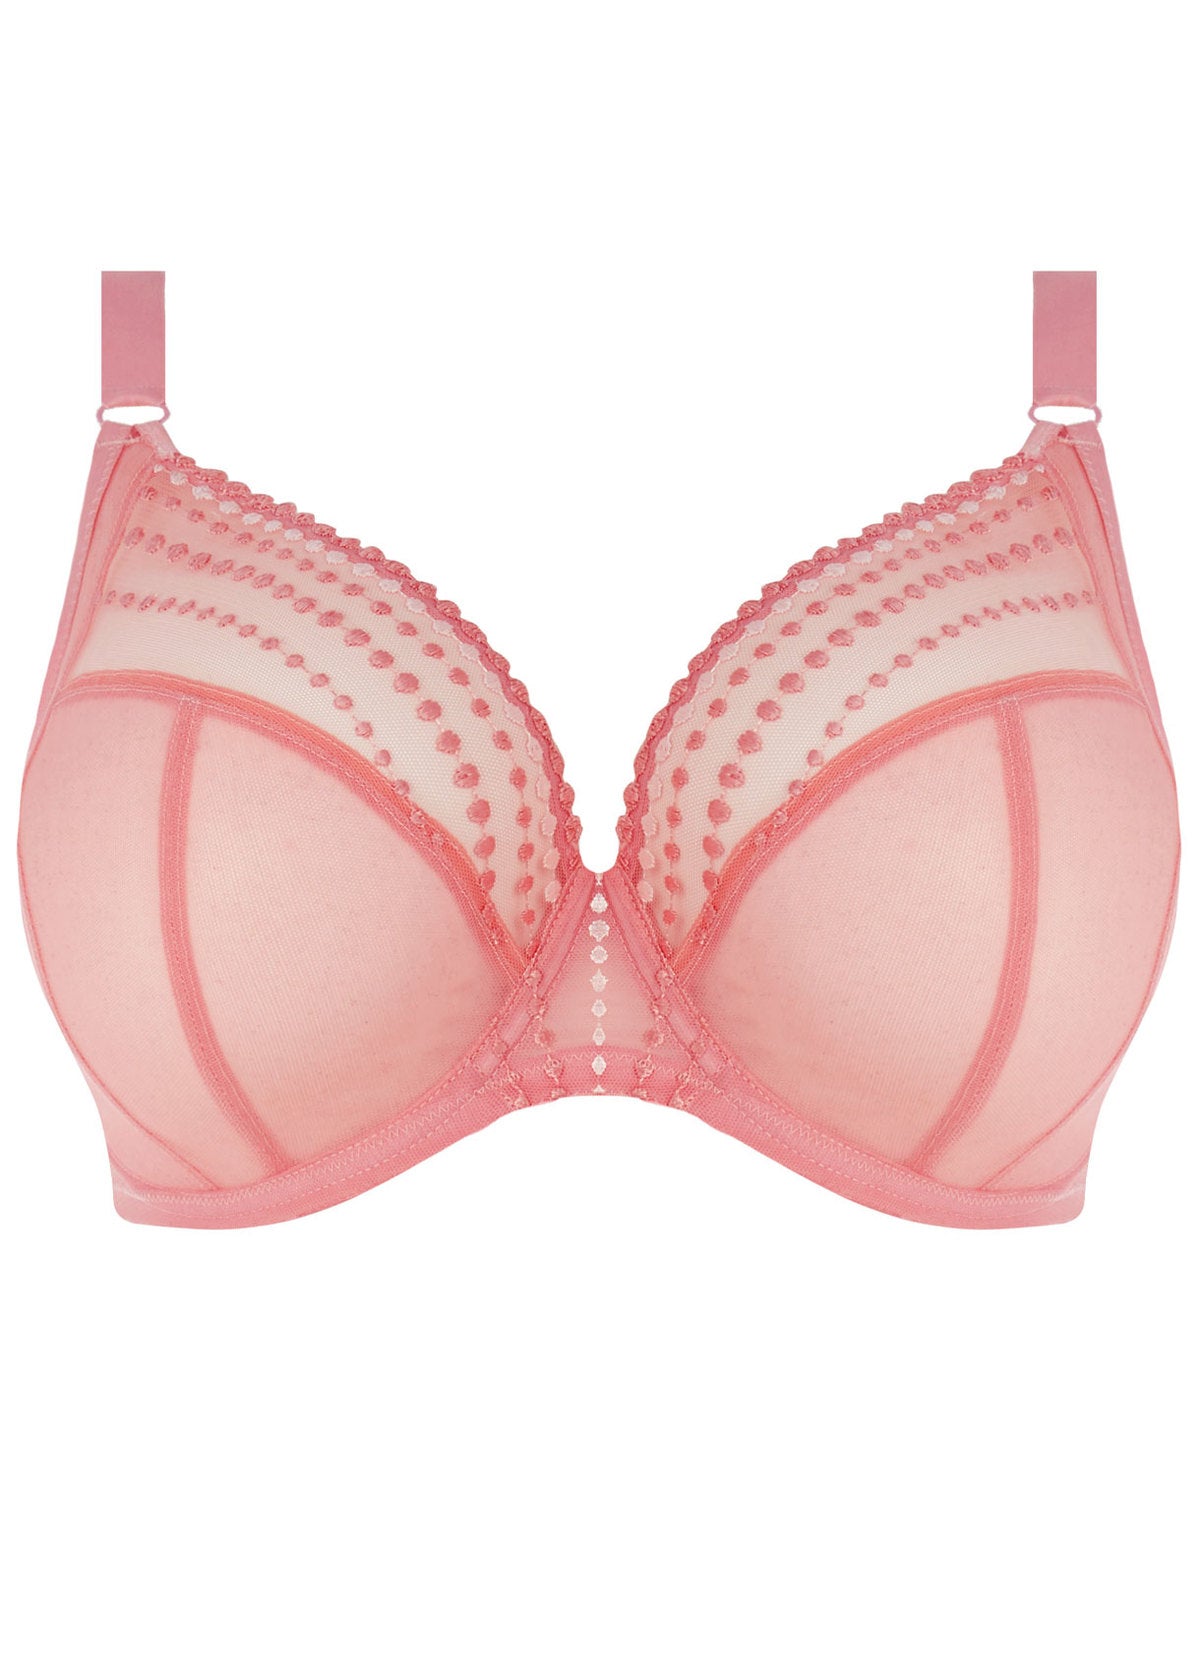 Matilda Underwire Plunge Bra Rose front view product image